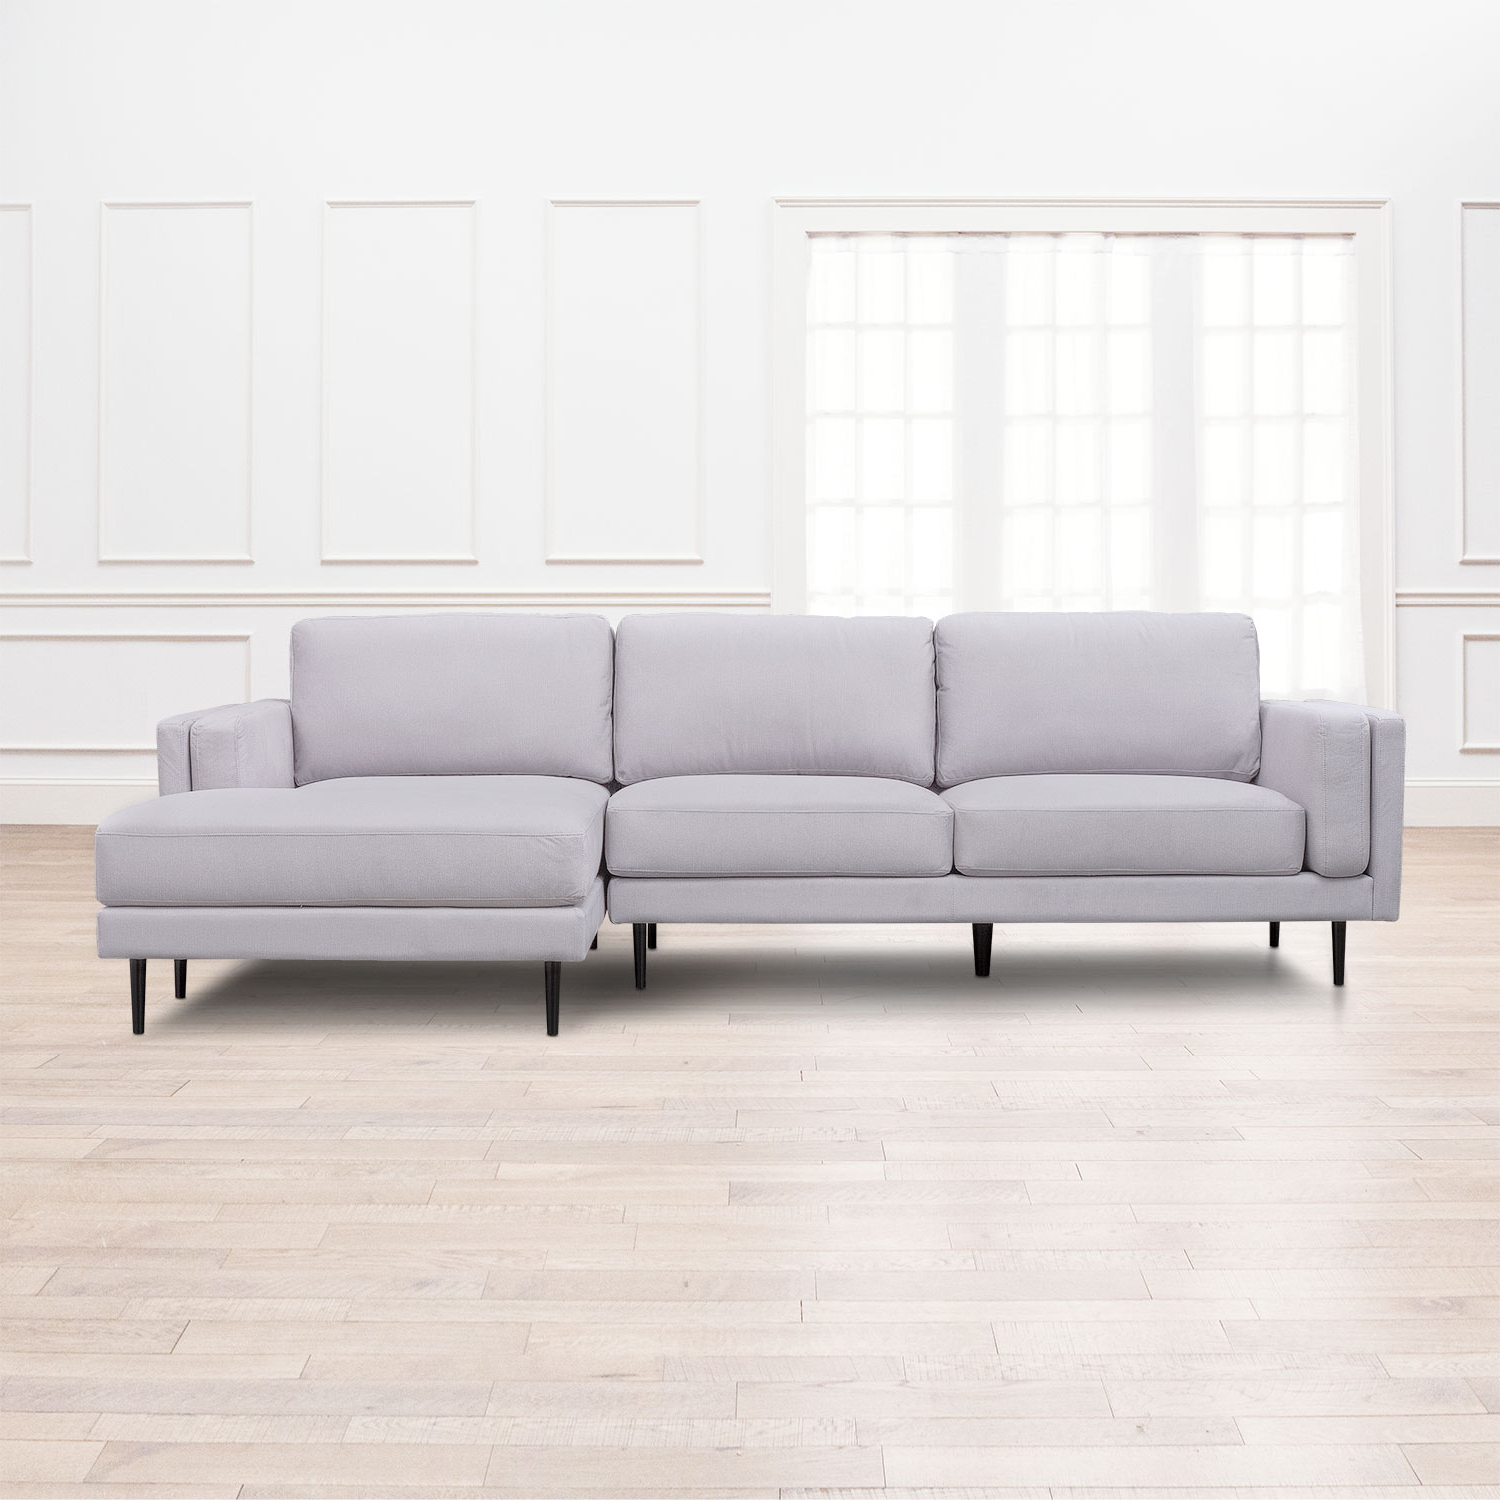 Mcdade Graphite 2 Piece Sectionals With Laf Chaise